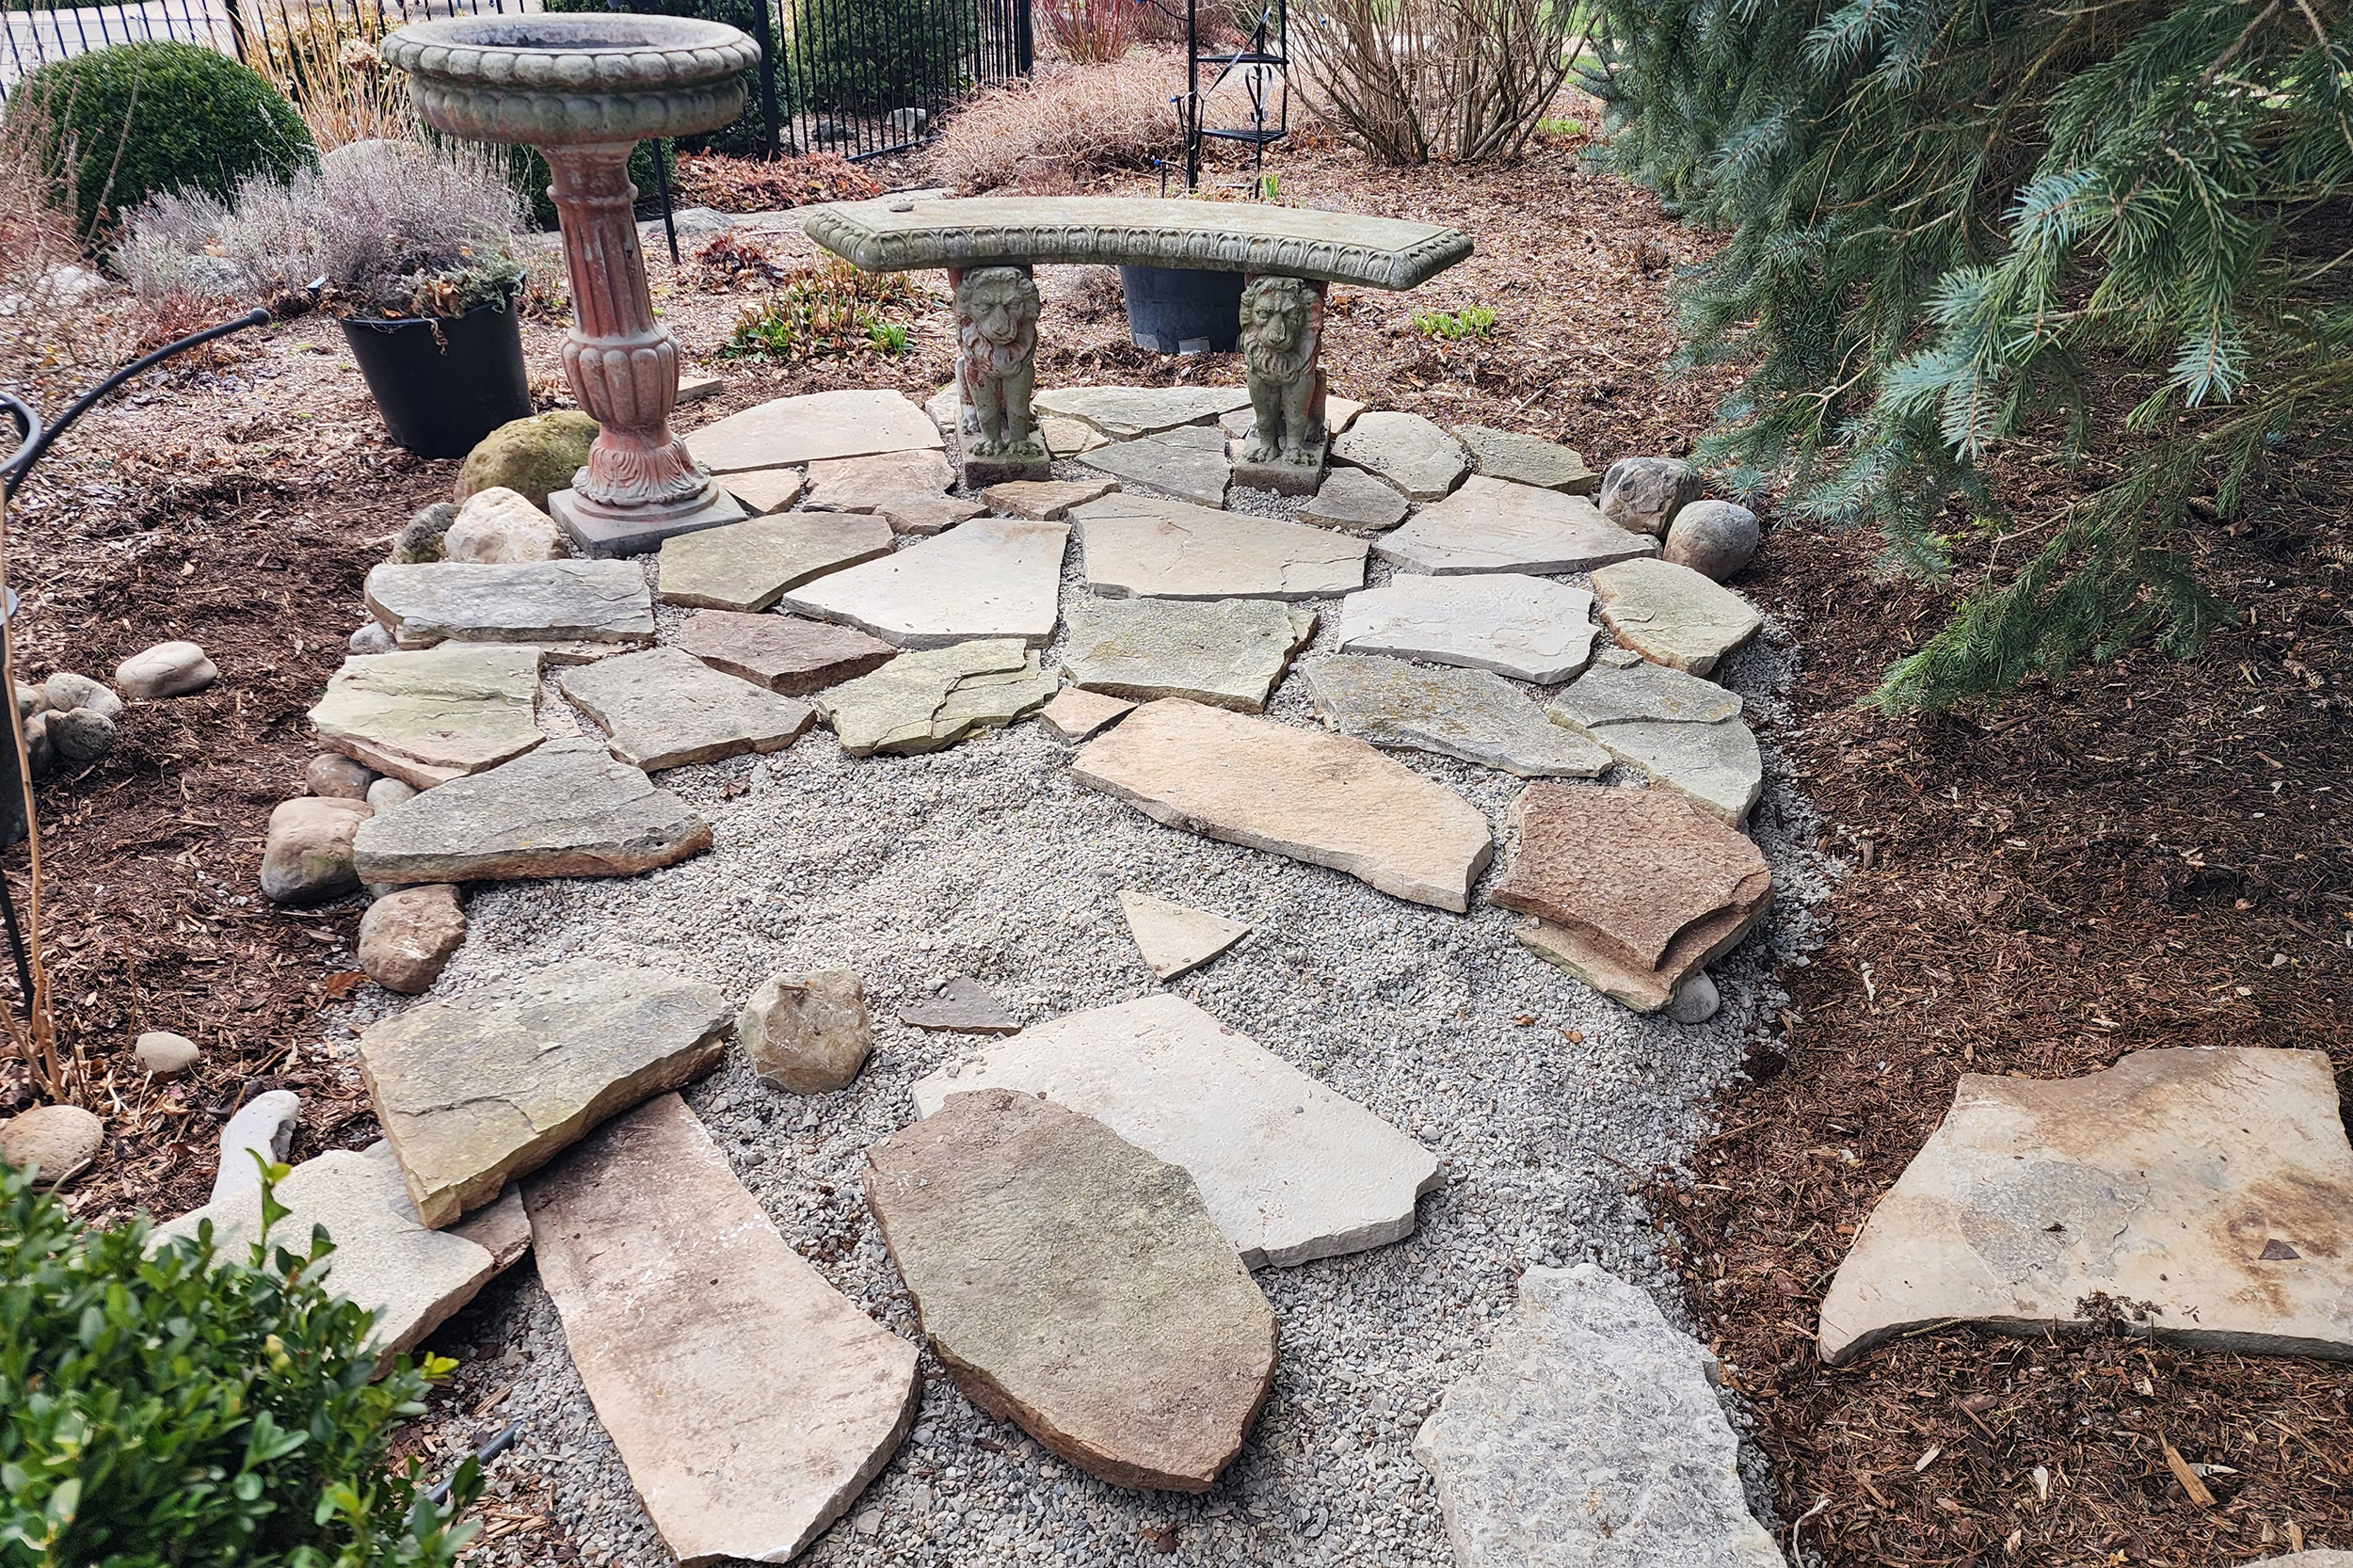 Flagstone half installed in the patio